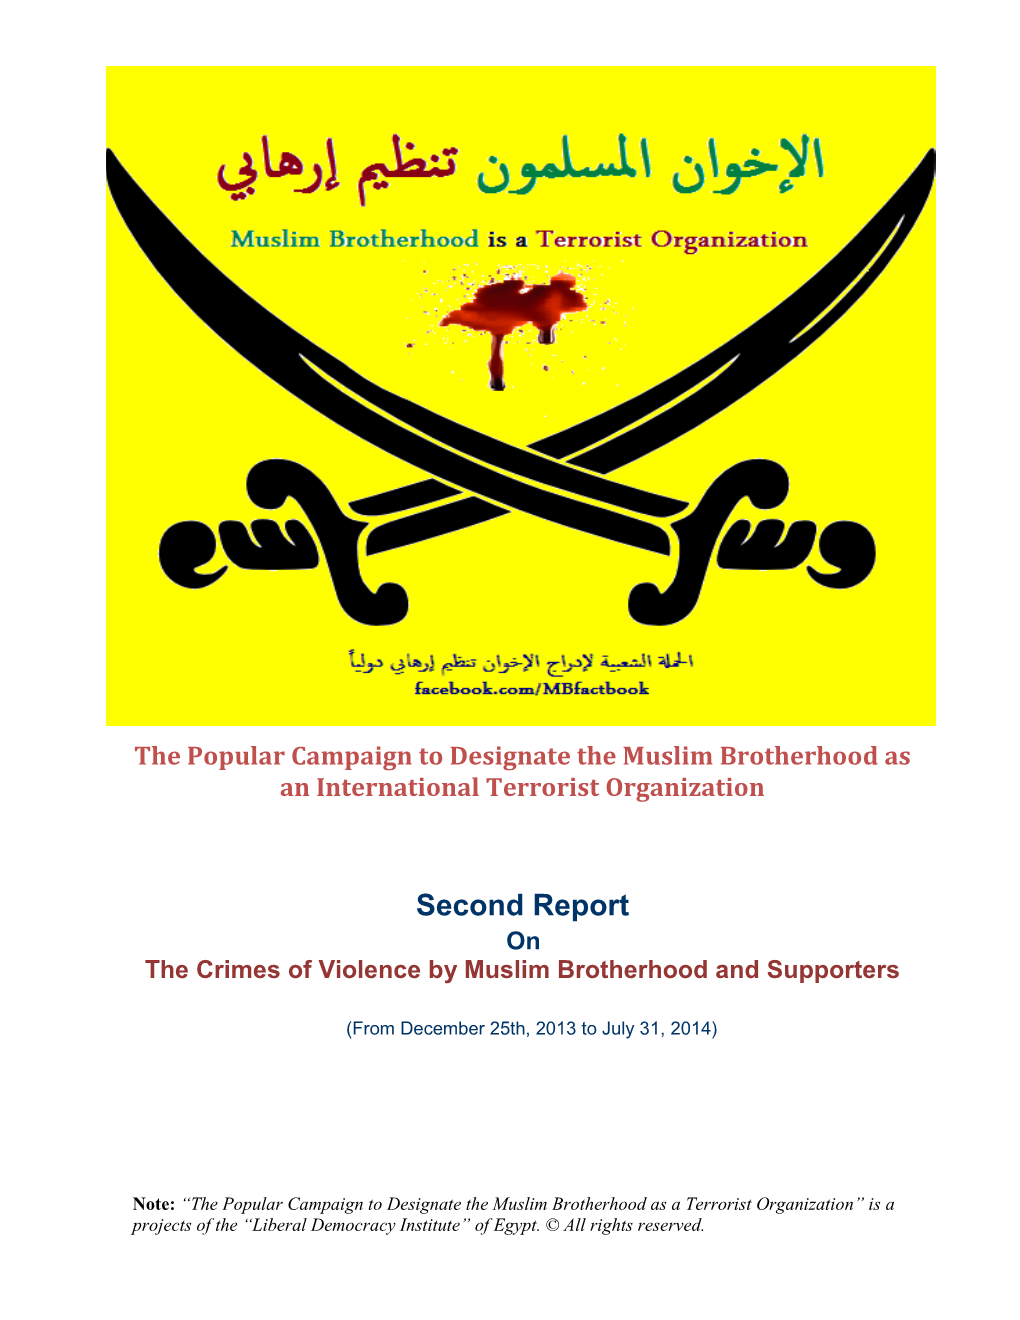 Second Report on the Crimes of Violence by Muslim Brotherhood and Supporters